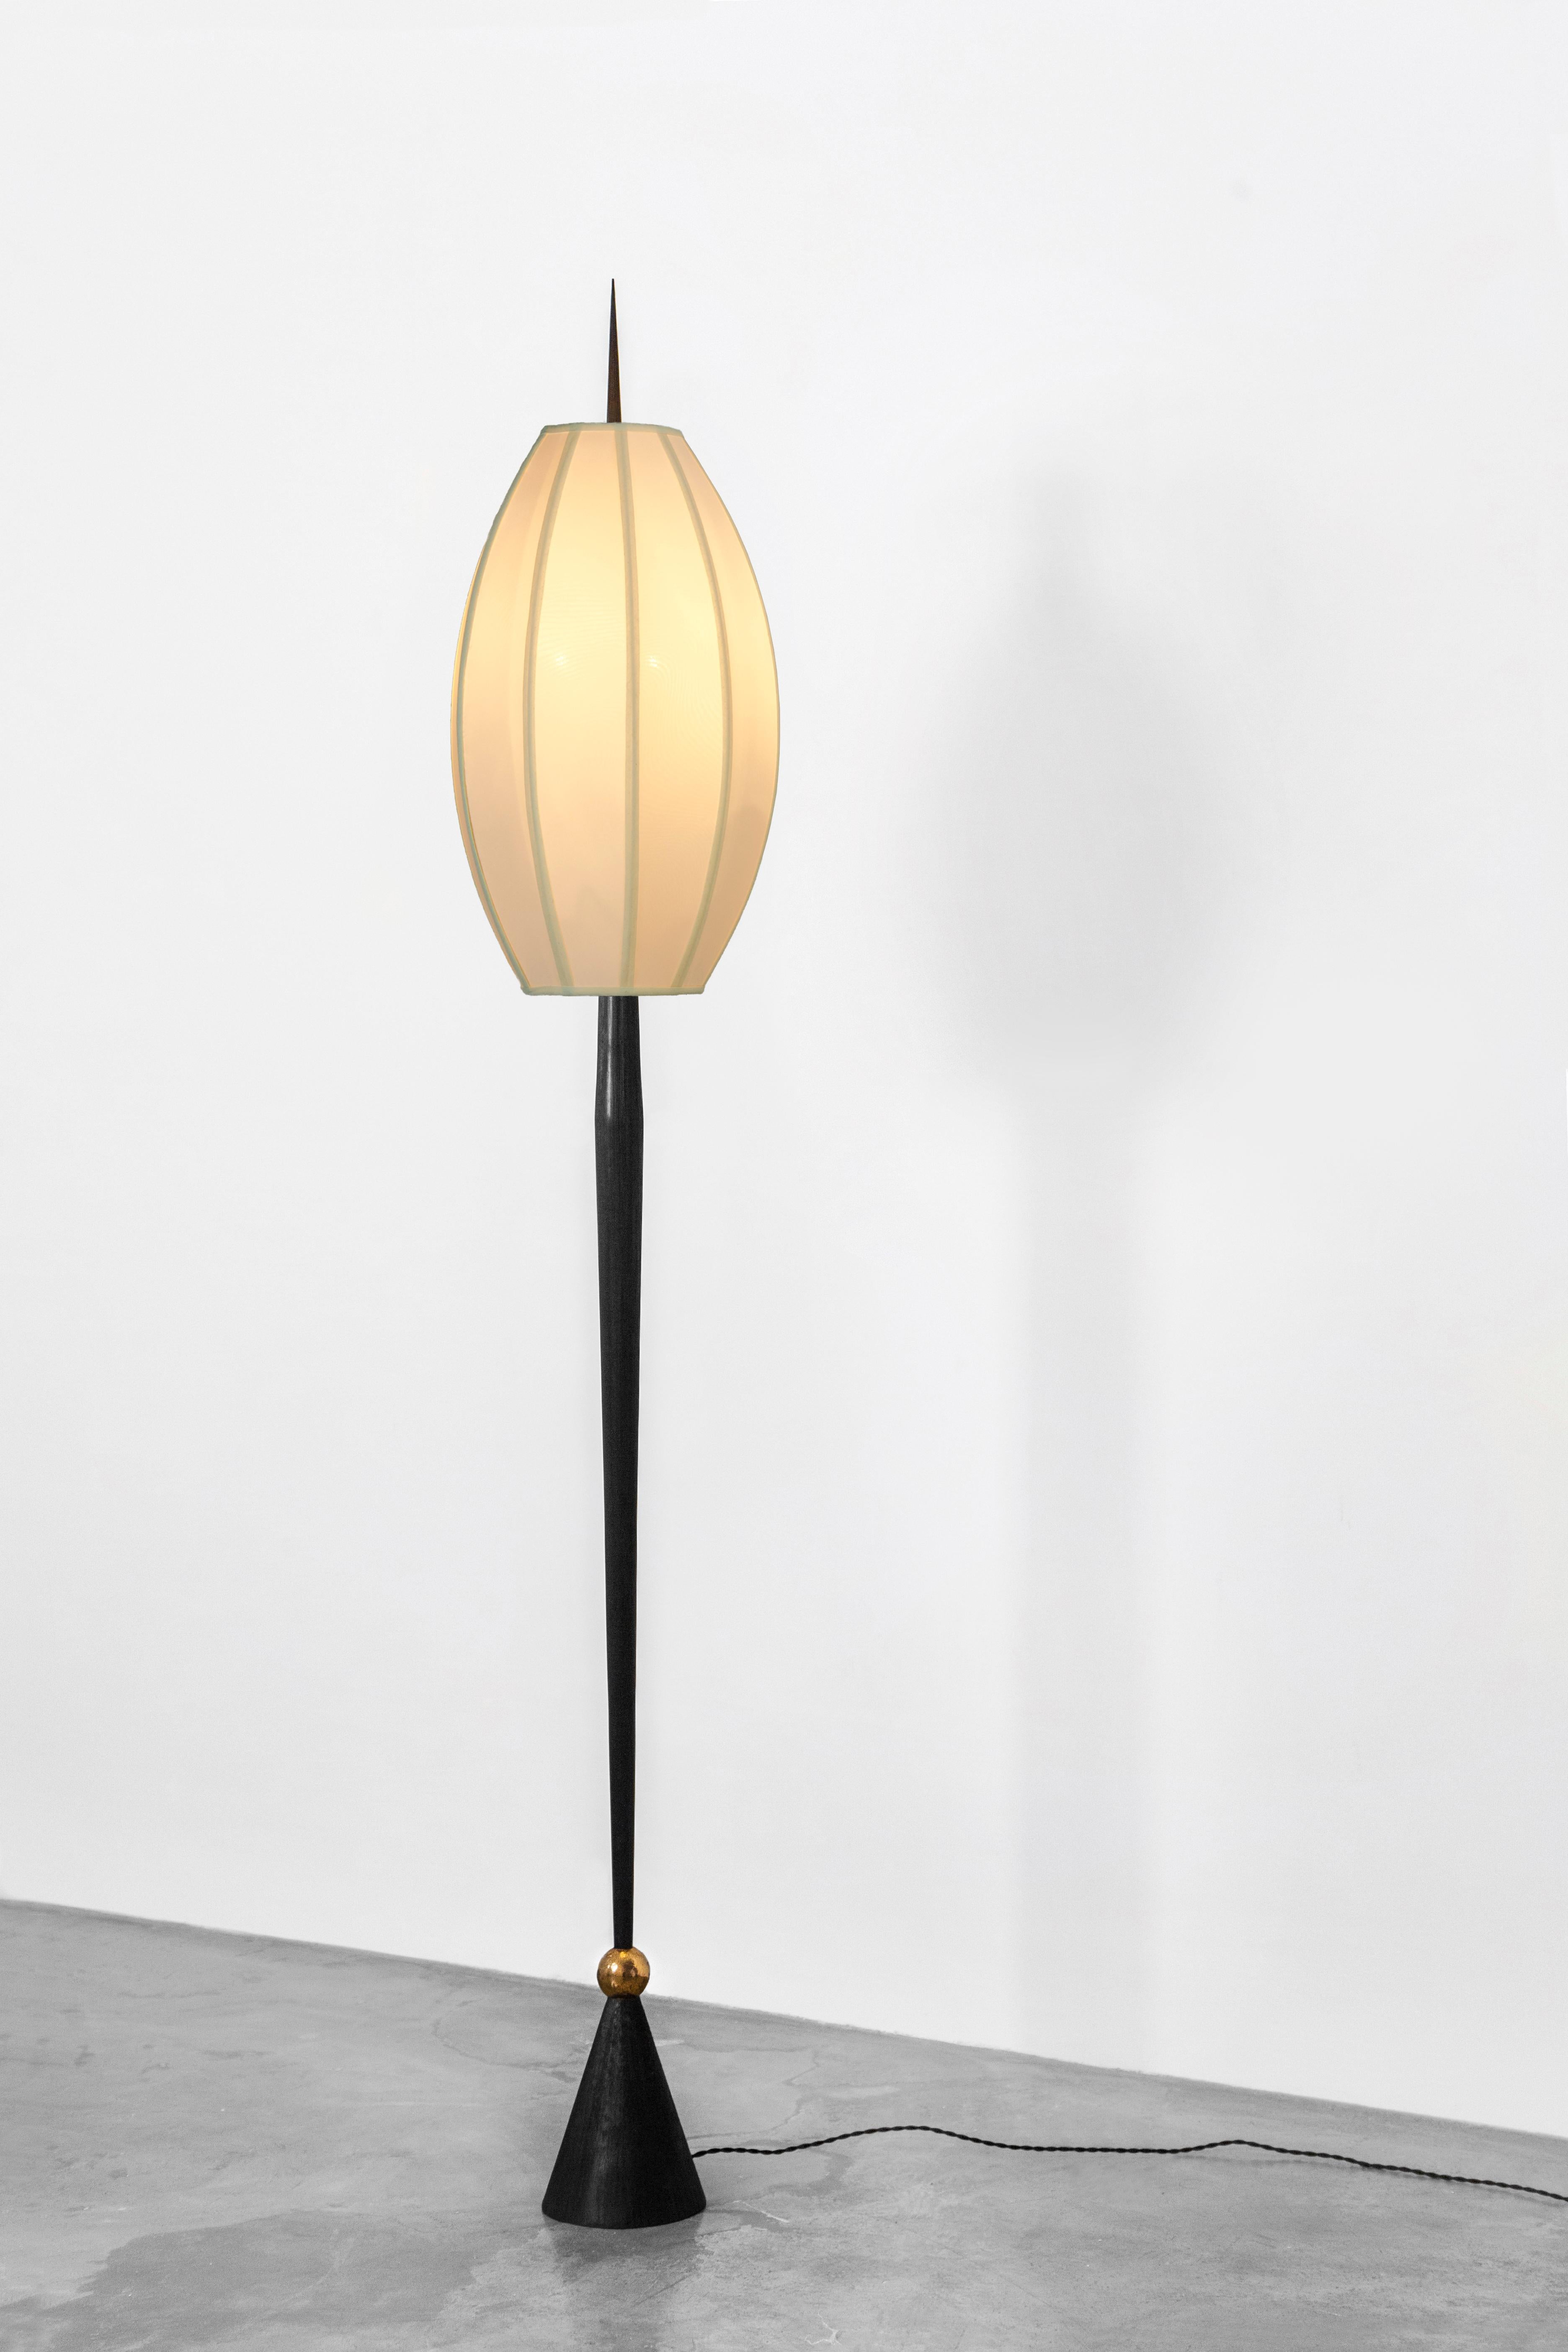 Taking inspiration from the Roman auxiliaries’ short javelin, Lancea, recalls the pole weapon, fashioned as if piercing through the silk shade of the lamp and emerging through the top as a finial. This elegant silhouette is assisted by the warm glow